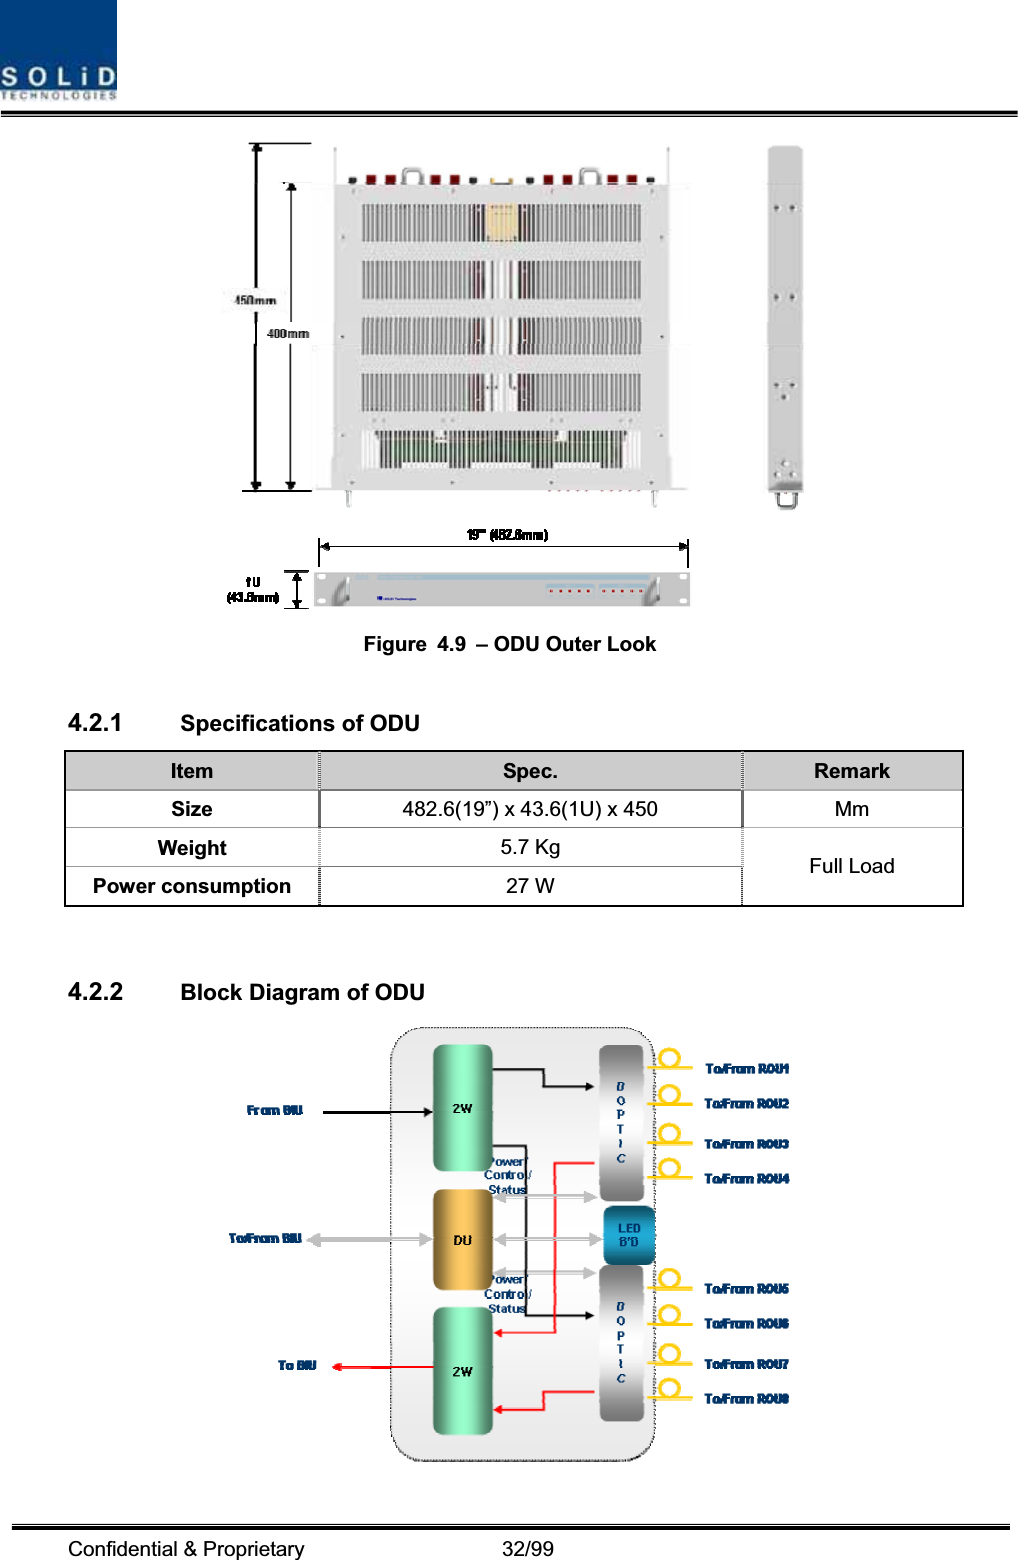 Confidential &amp; Proprietary                   32/99 Figure  4.9  – ODU Outer Look 4.2.1 Specifications of ODU Item Spec.  Remark Size  482.6(19”) x 43.6(1U) x 450  Mm Weight  5.7 Kg Power consumption  27 W  Full Load 4.2.2 Block Diagram of ODU 